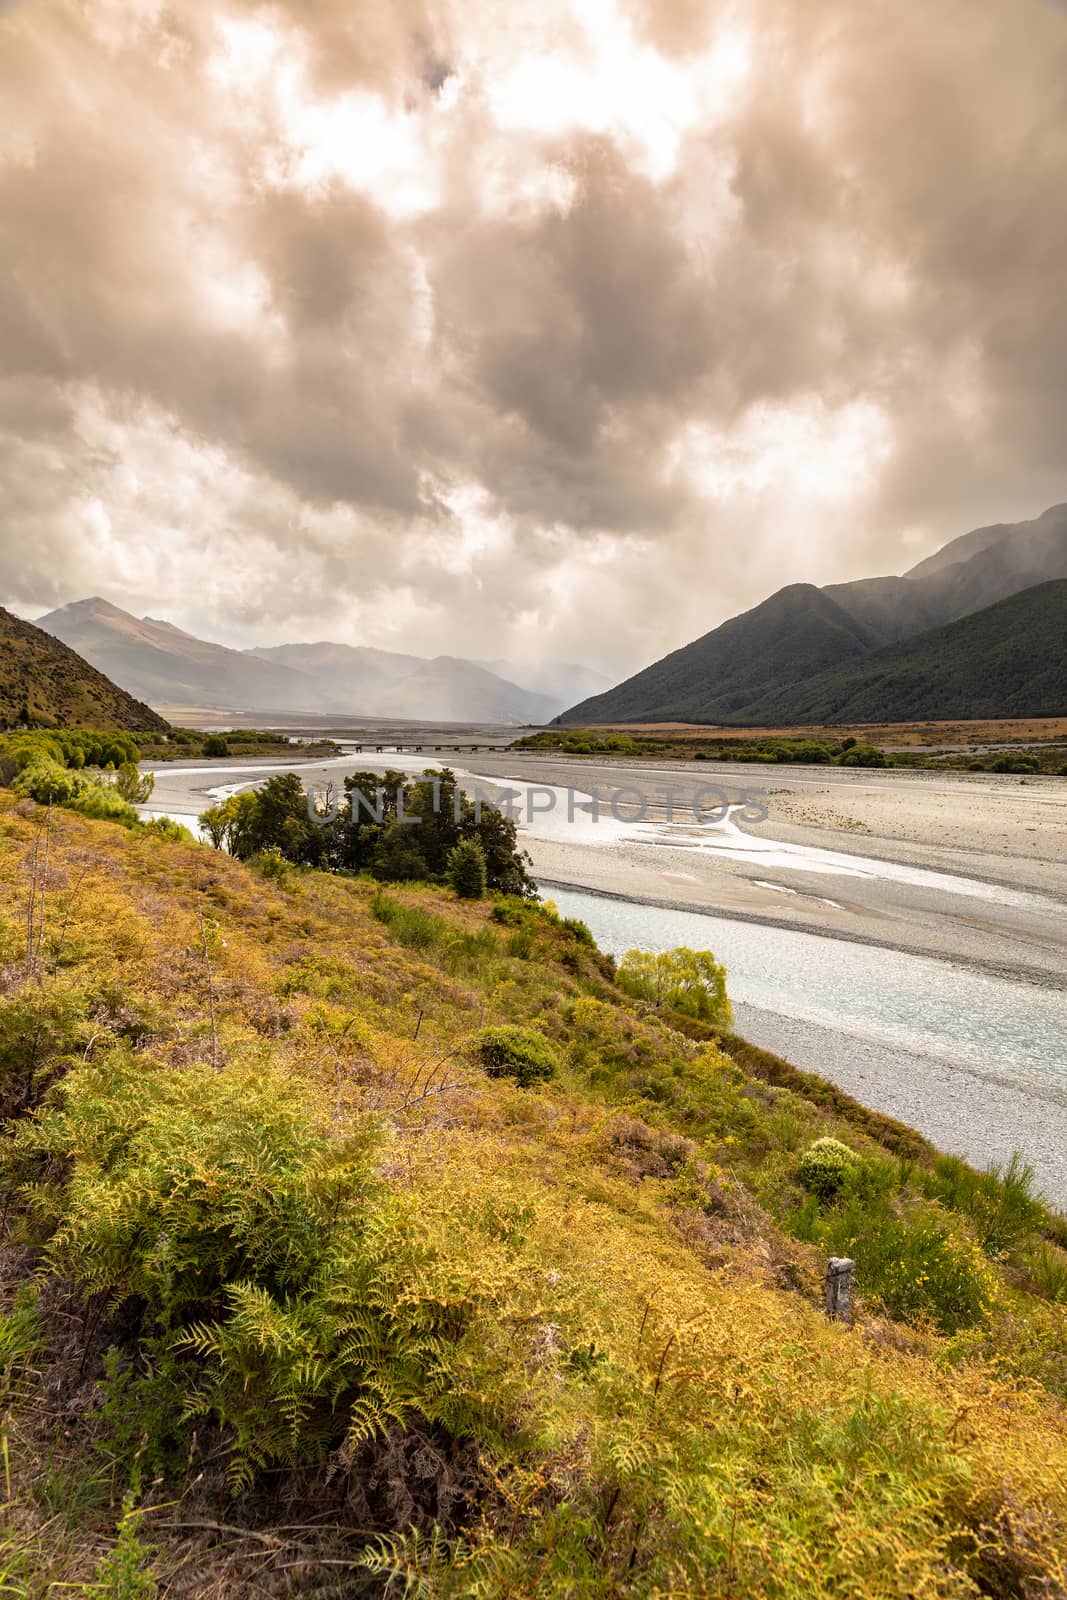 An image of a dramatic landscape scenery Arthur's pass in south New Zealand